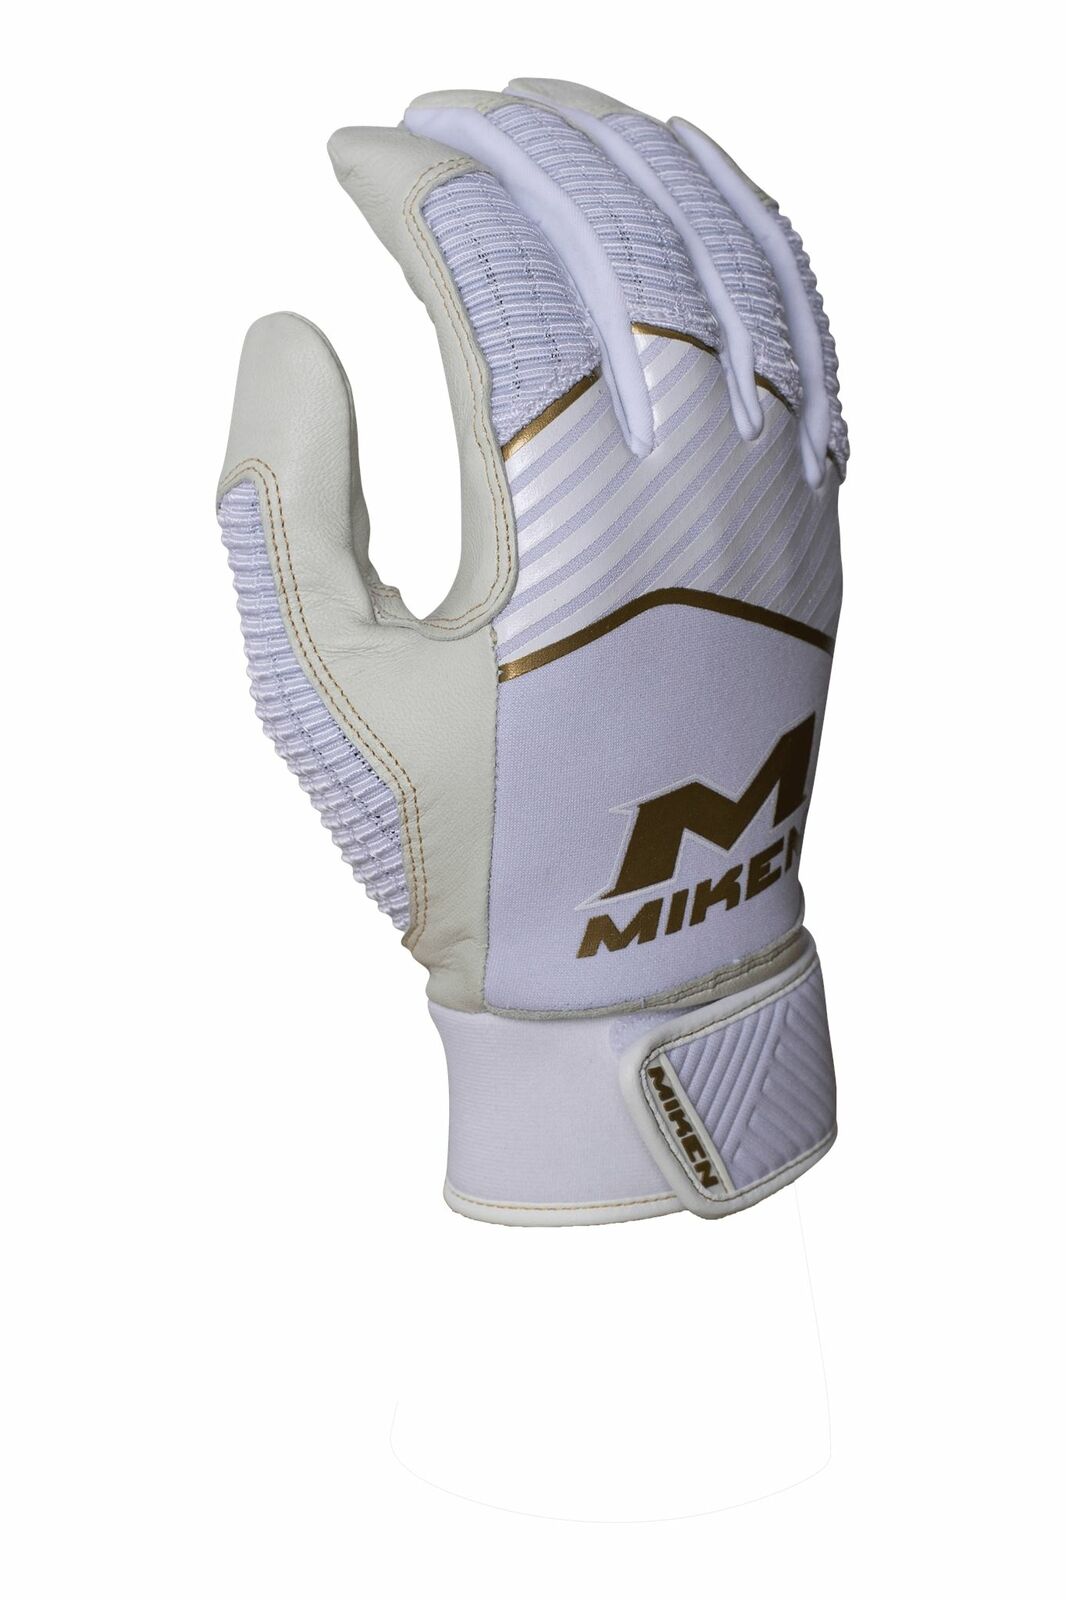 Miken Softball MK7X Adult White High quality new Batting and Gloves: MBGGLD- Outstanding Gold